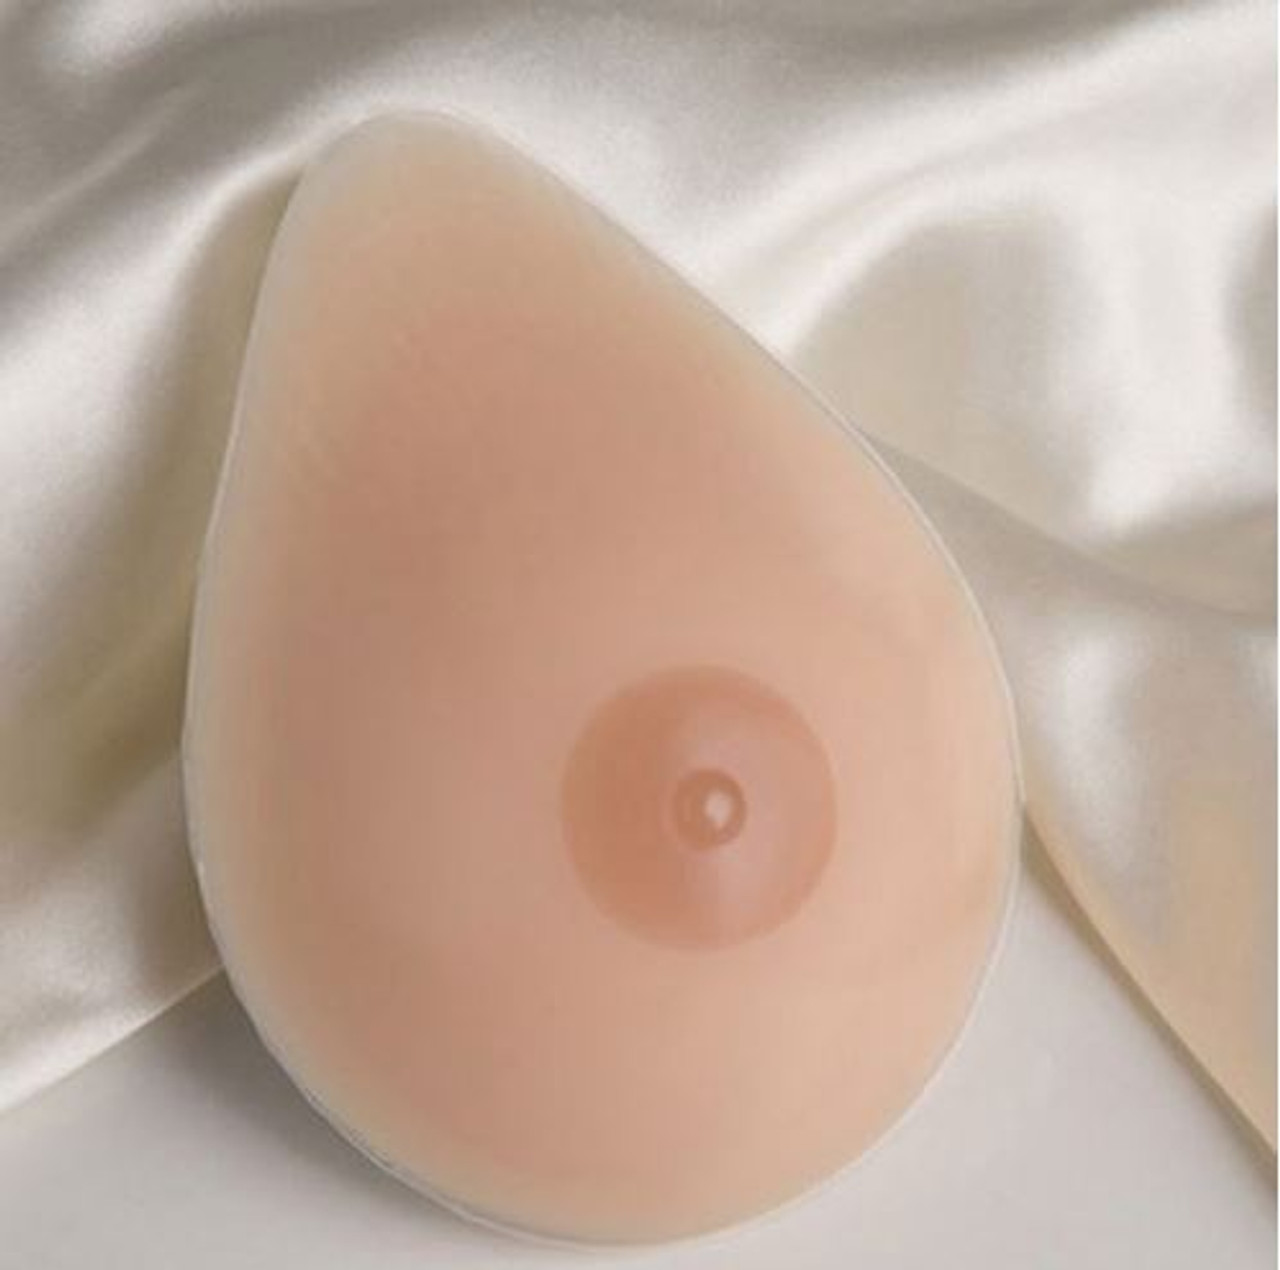 Standard Full Triangle Breast Forms - sold in Pairs- For Double